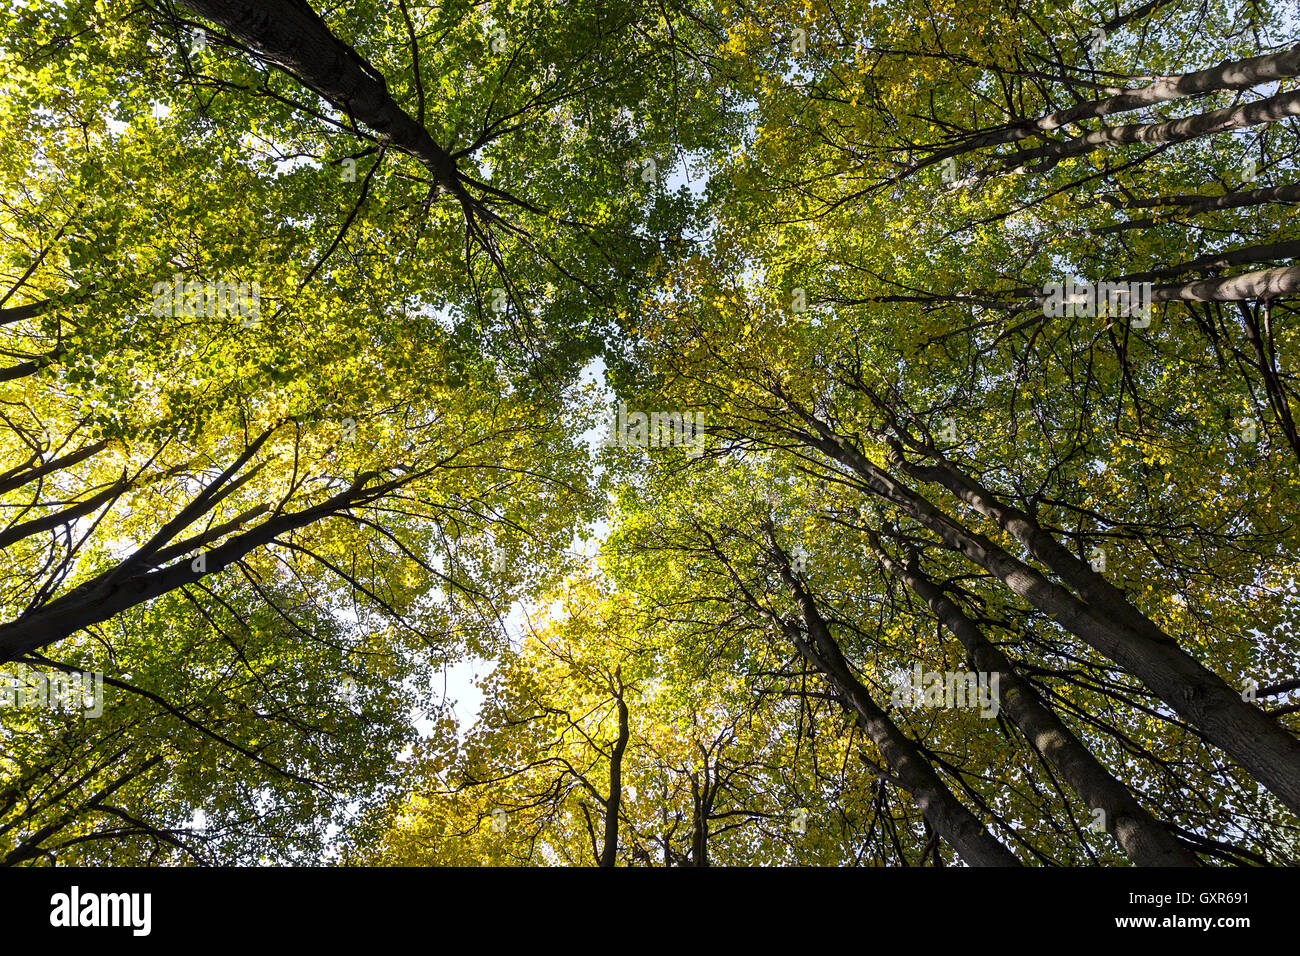 Looking up in a beech tree forest in autumn Stock Photo